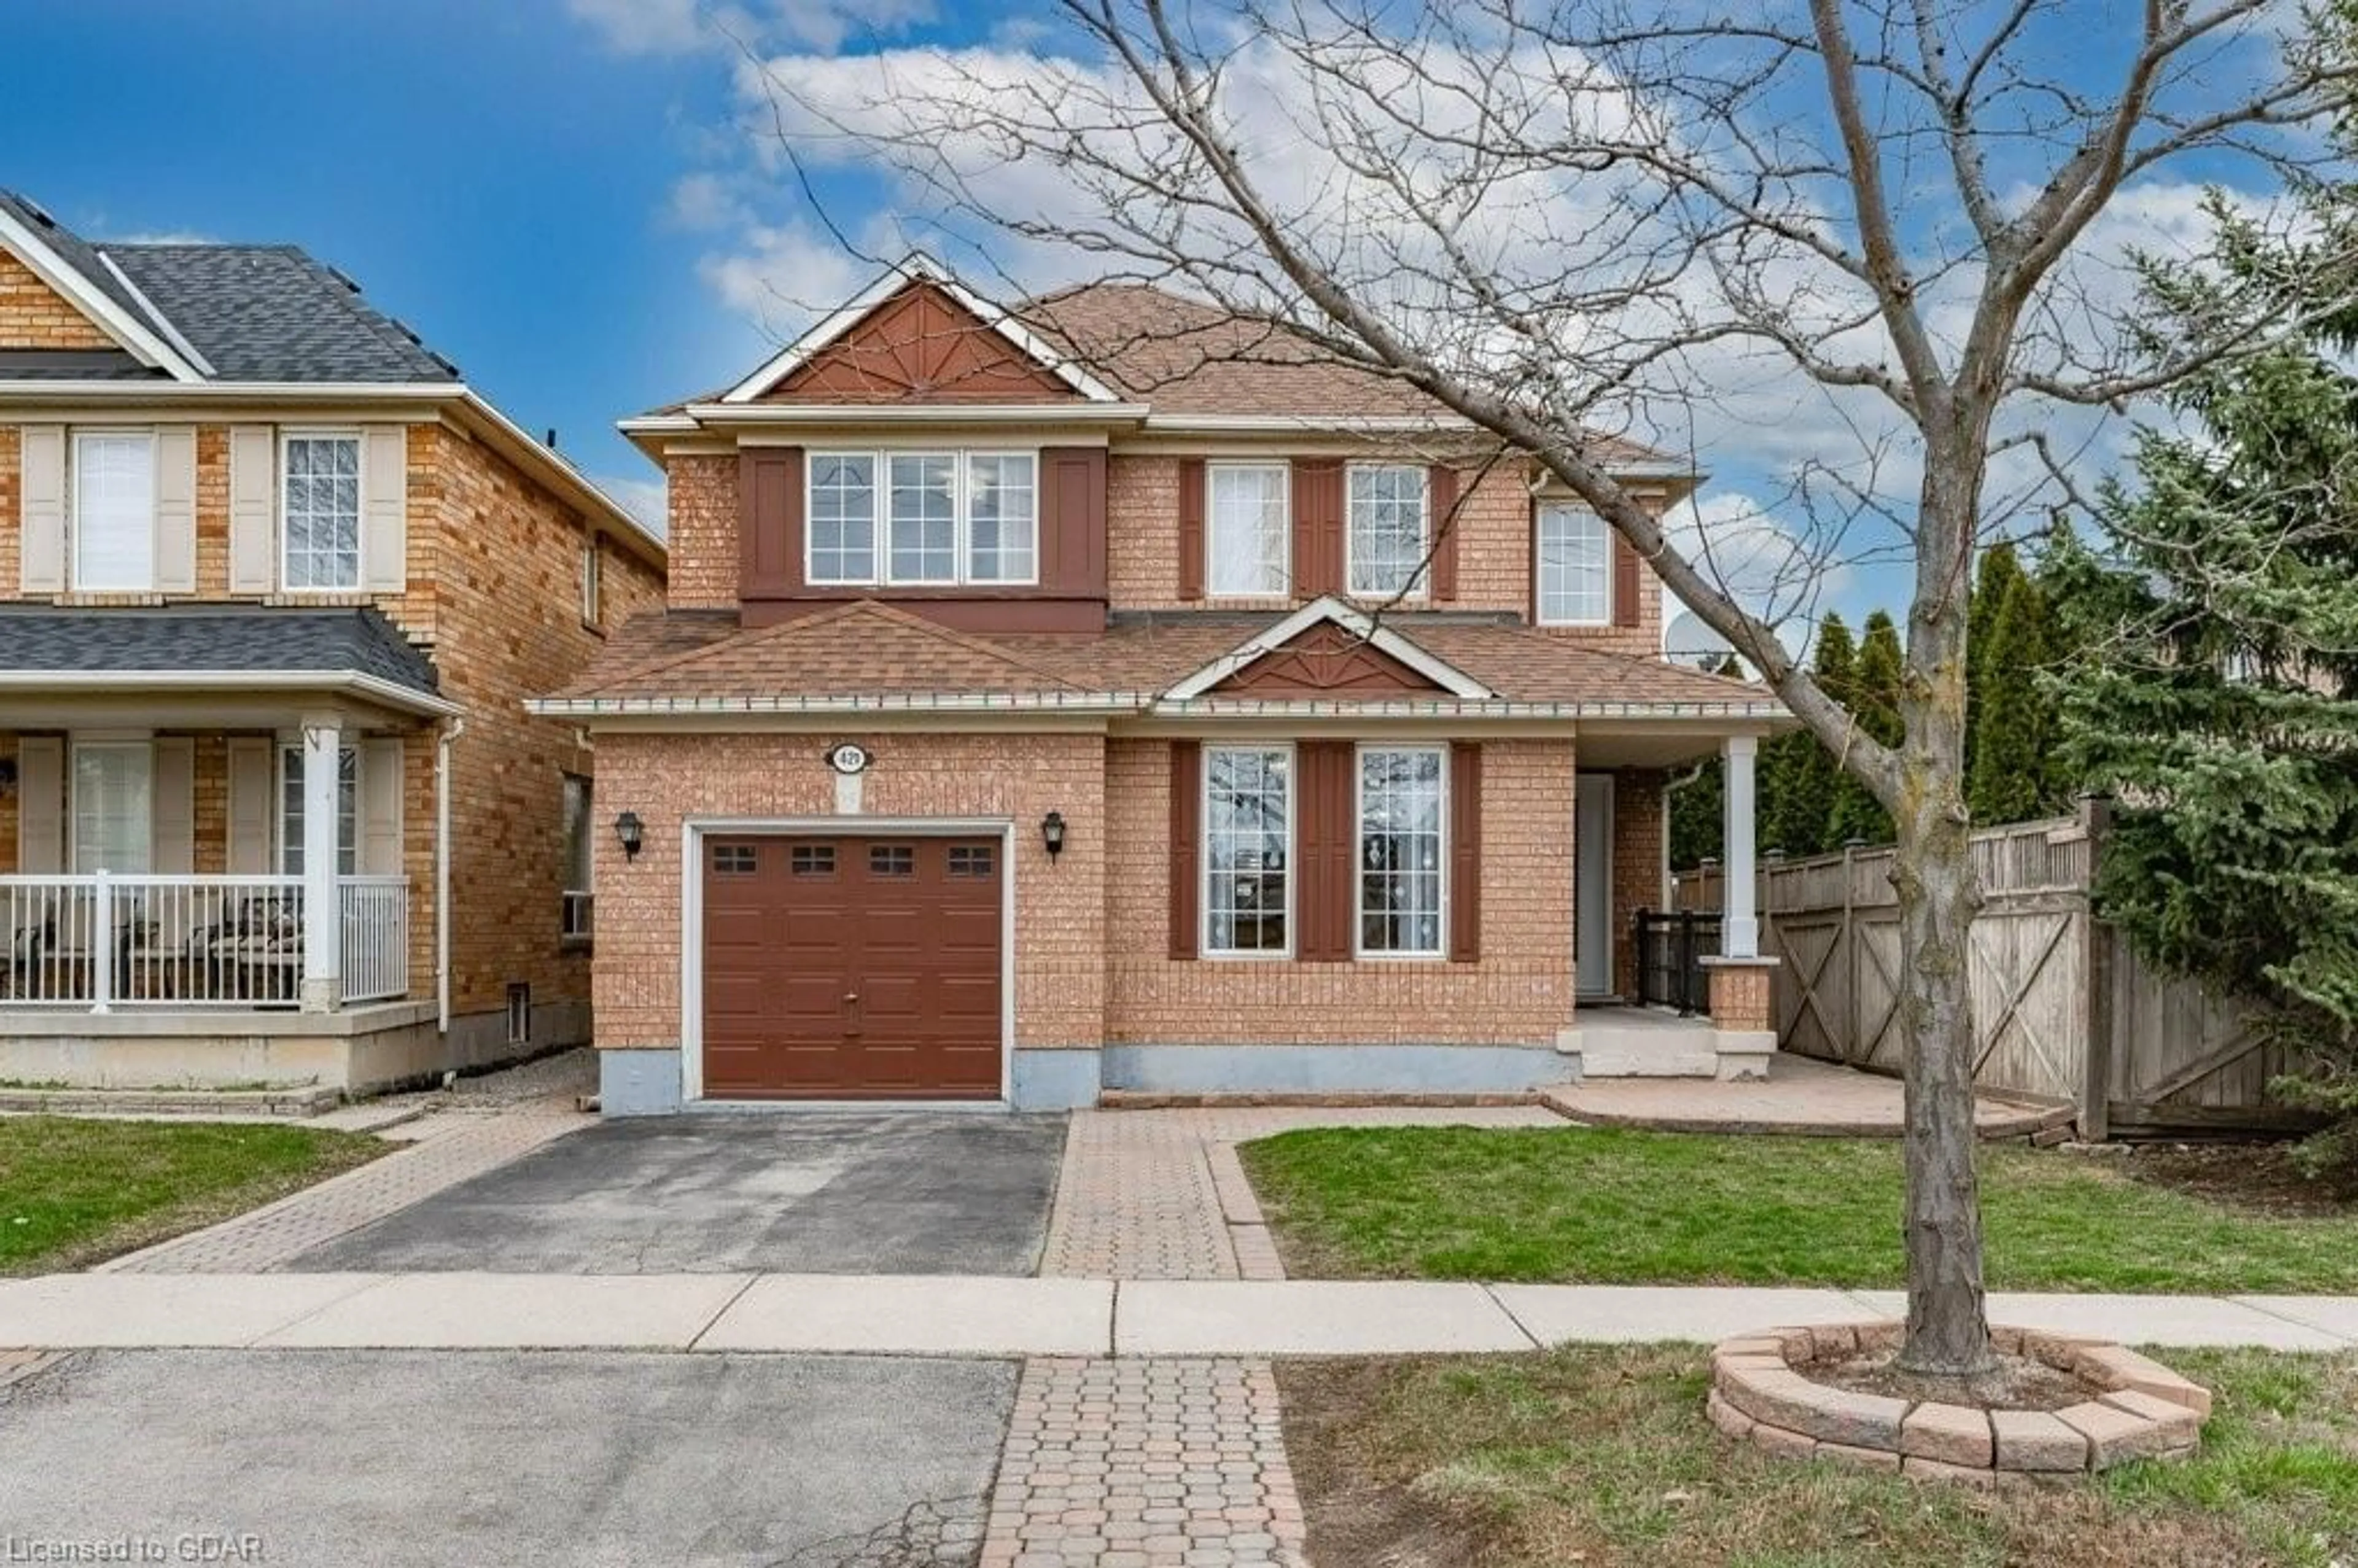 Home with brick exterior material for 421 Cedar Hedge Rd, Milton Ontario L9T 5K7